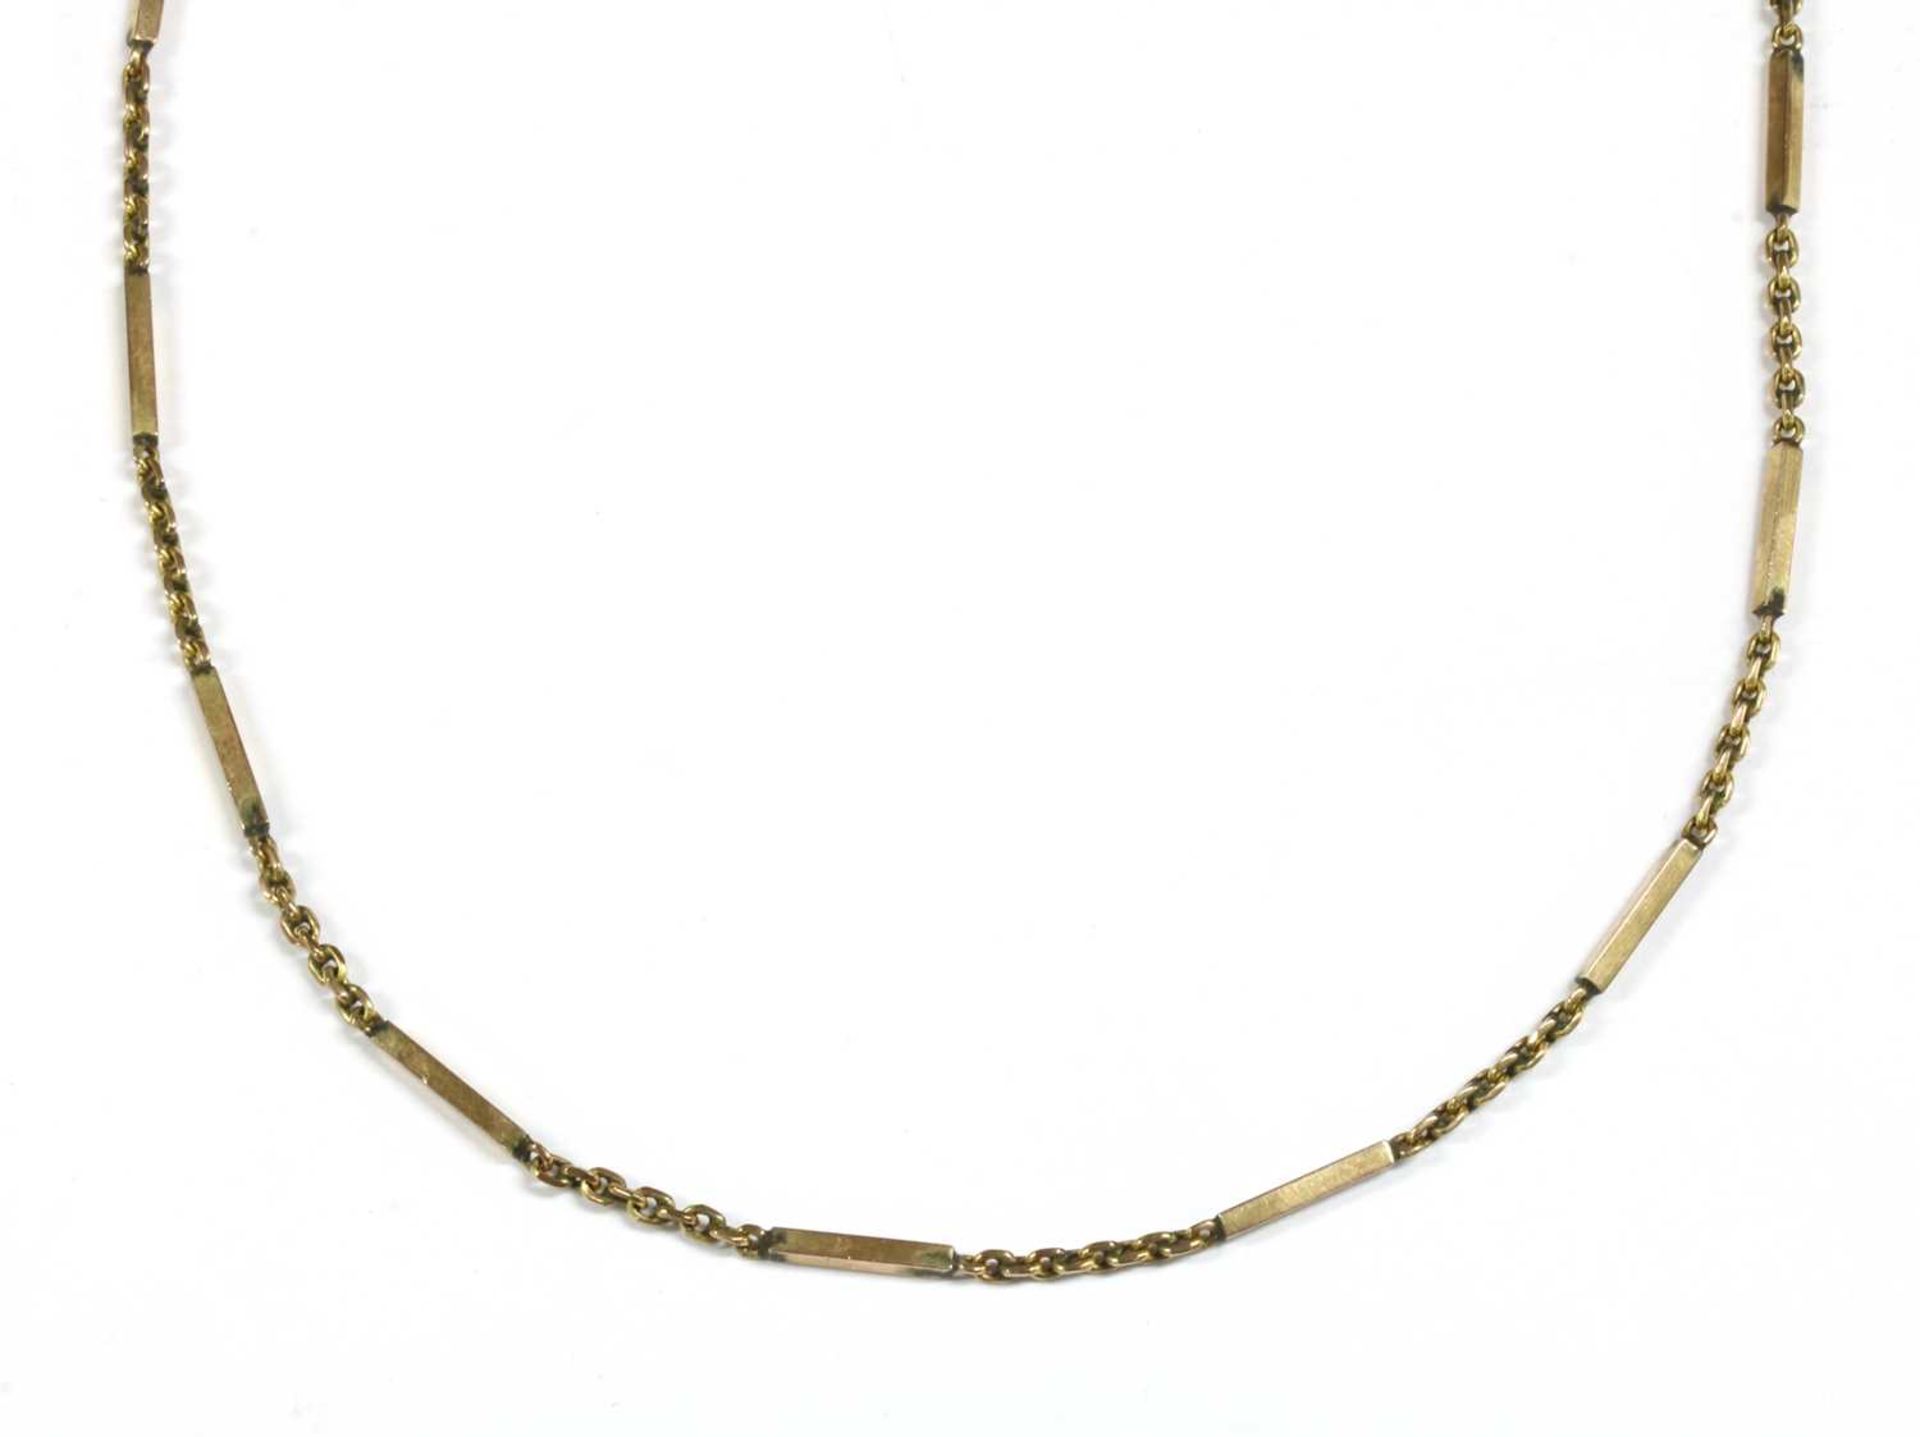 A gold bar and trace link necklace,